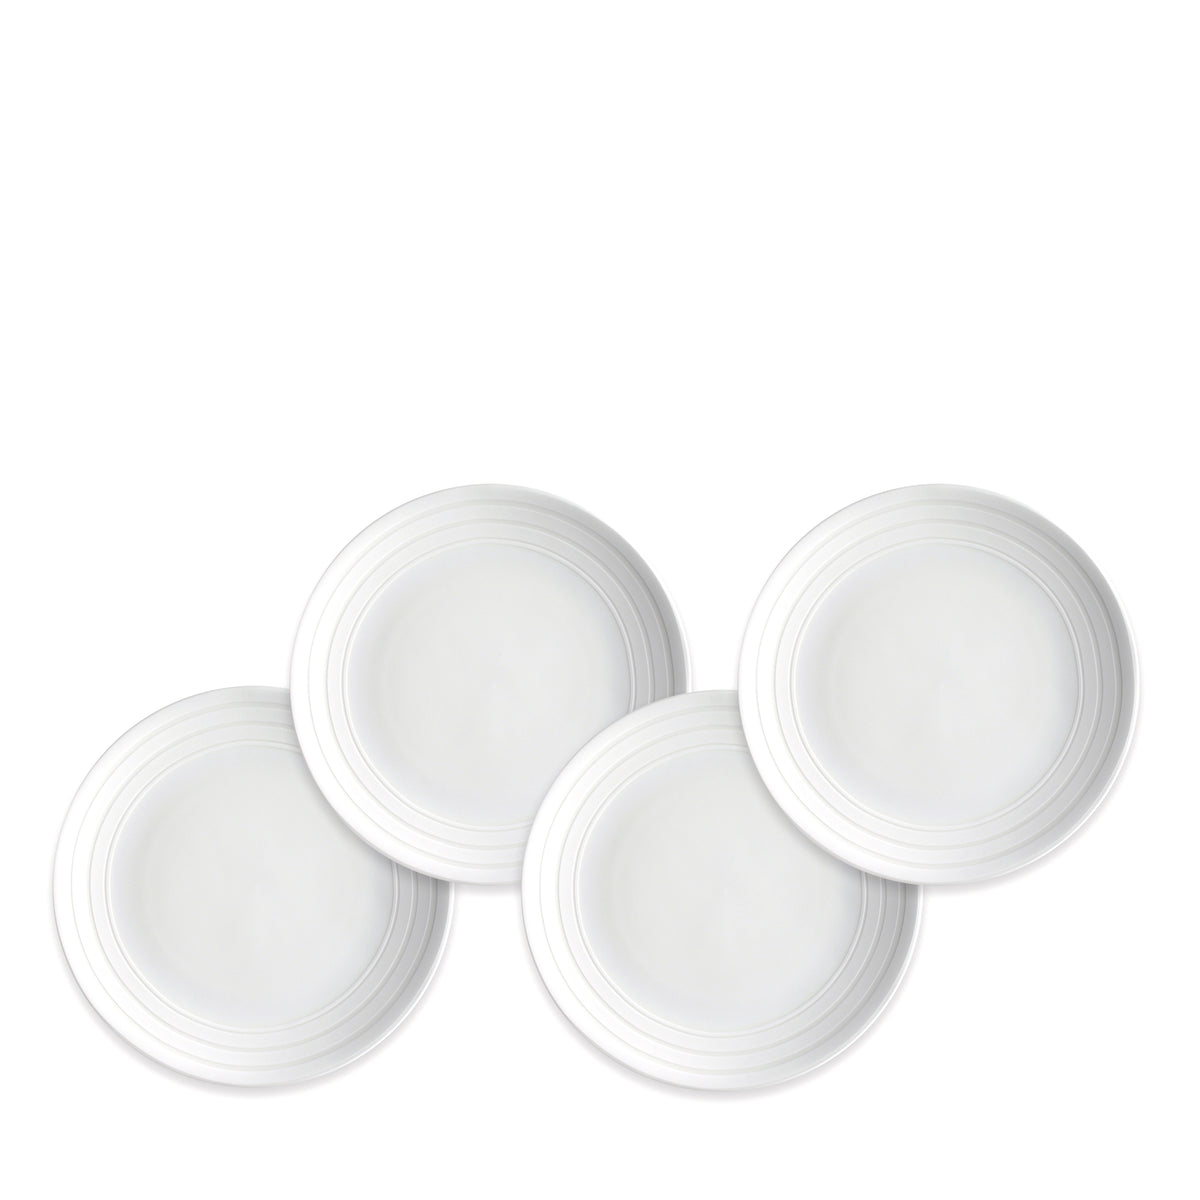 Four white, round plates with simple, concentric circle designs on the edges in the elegant **Cambridge Stripe Small Plates** pattern are arranged in a staggered layout against a plain white background. **Caskata Artisanal Home**